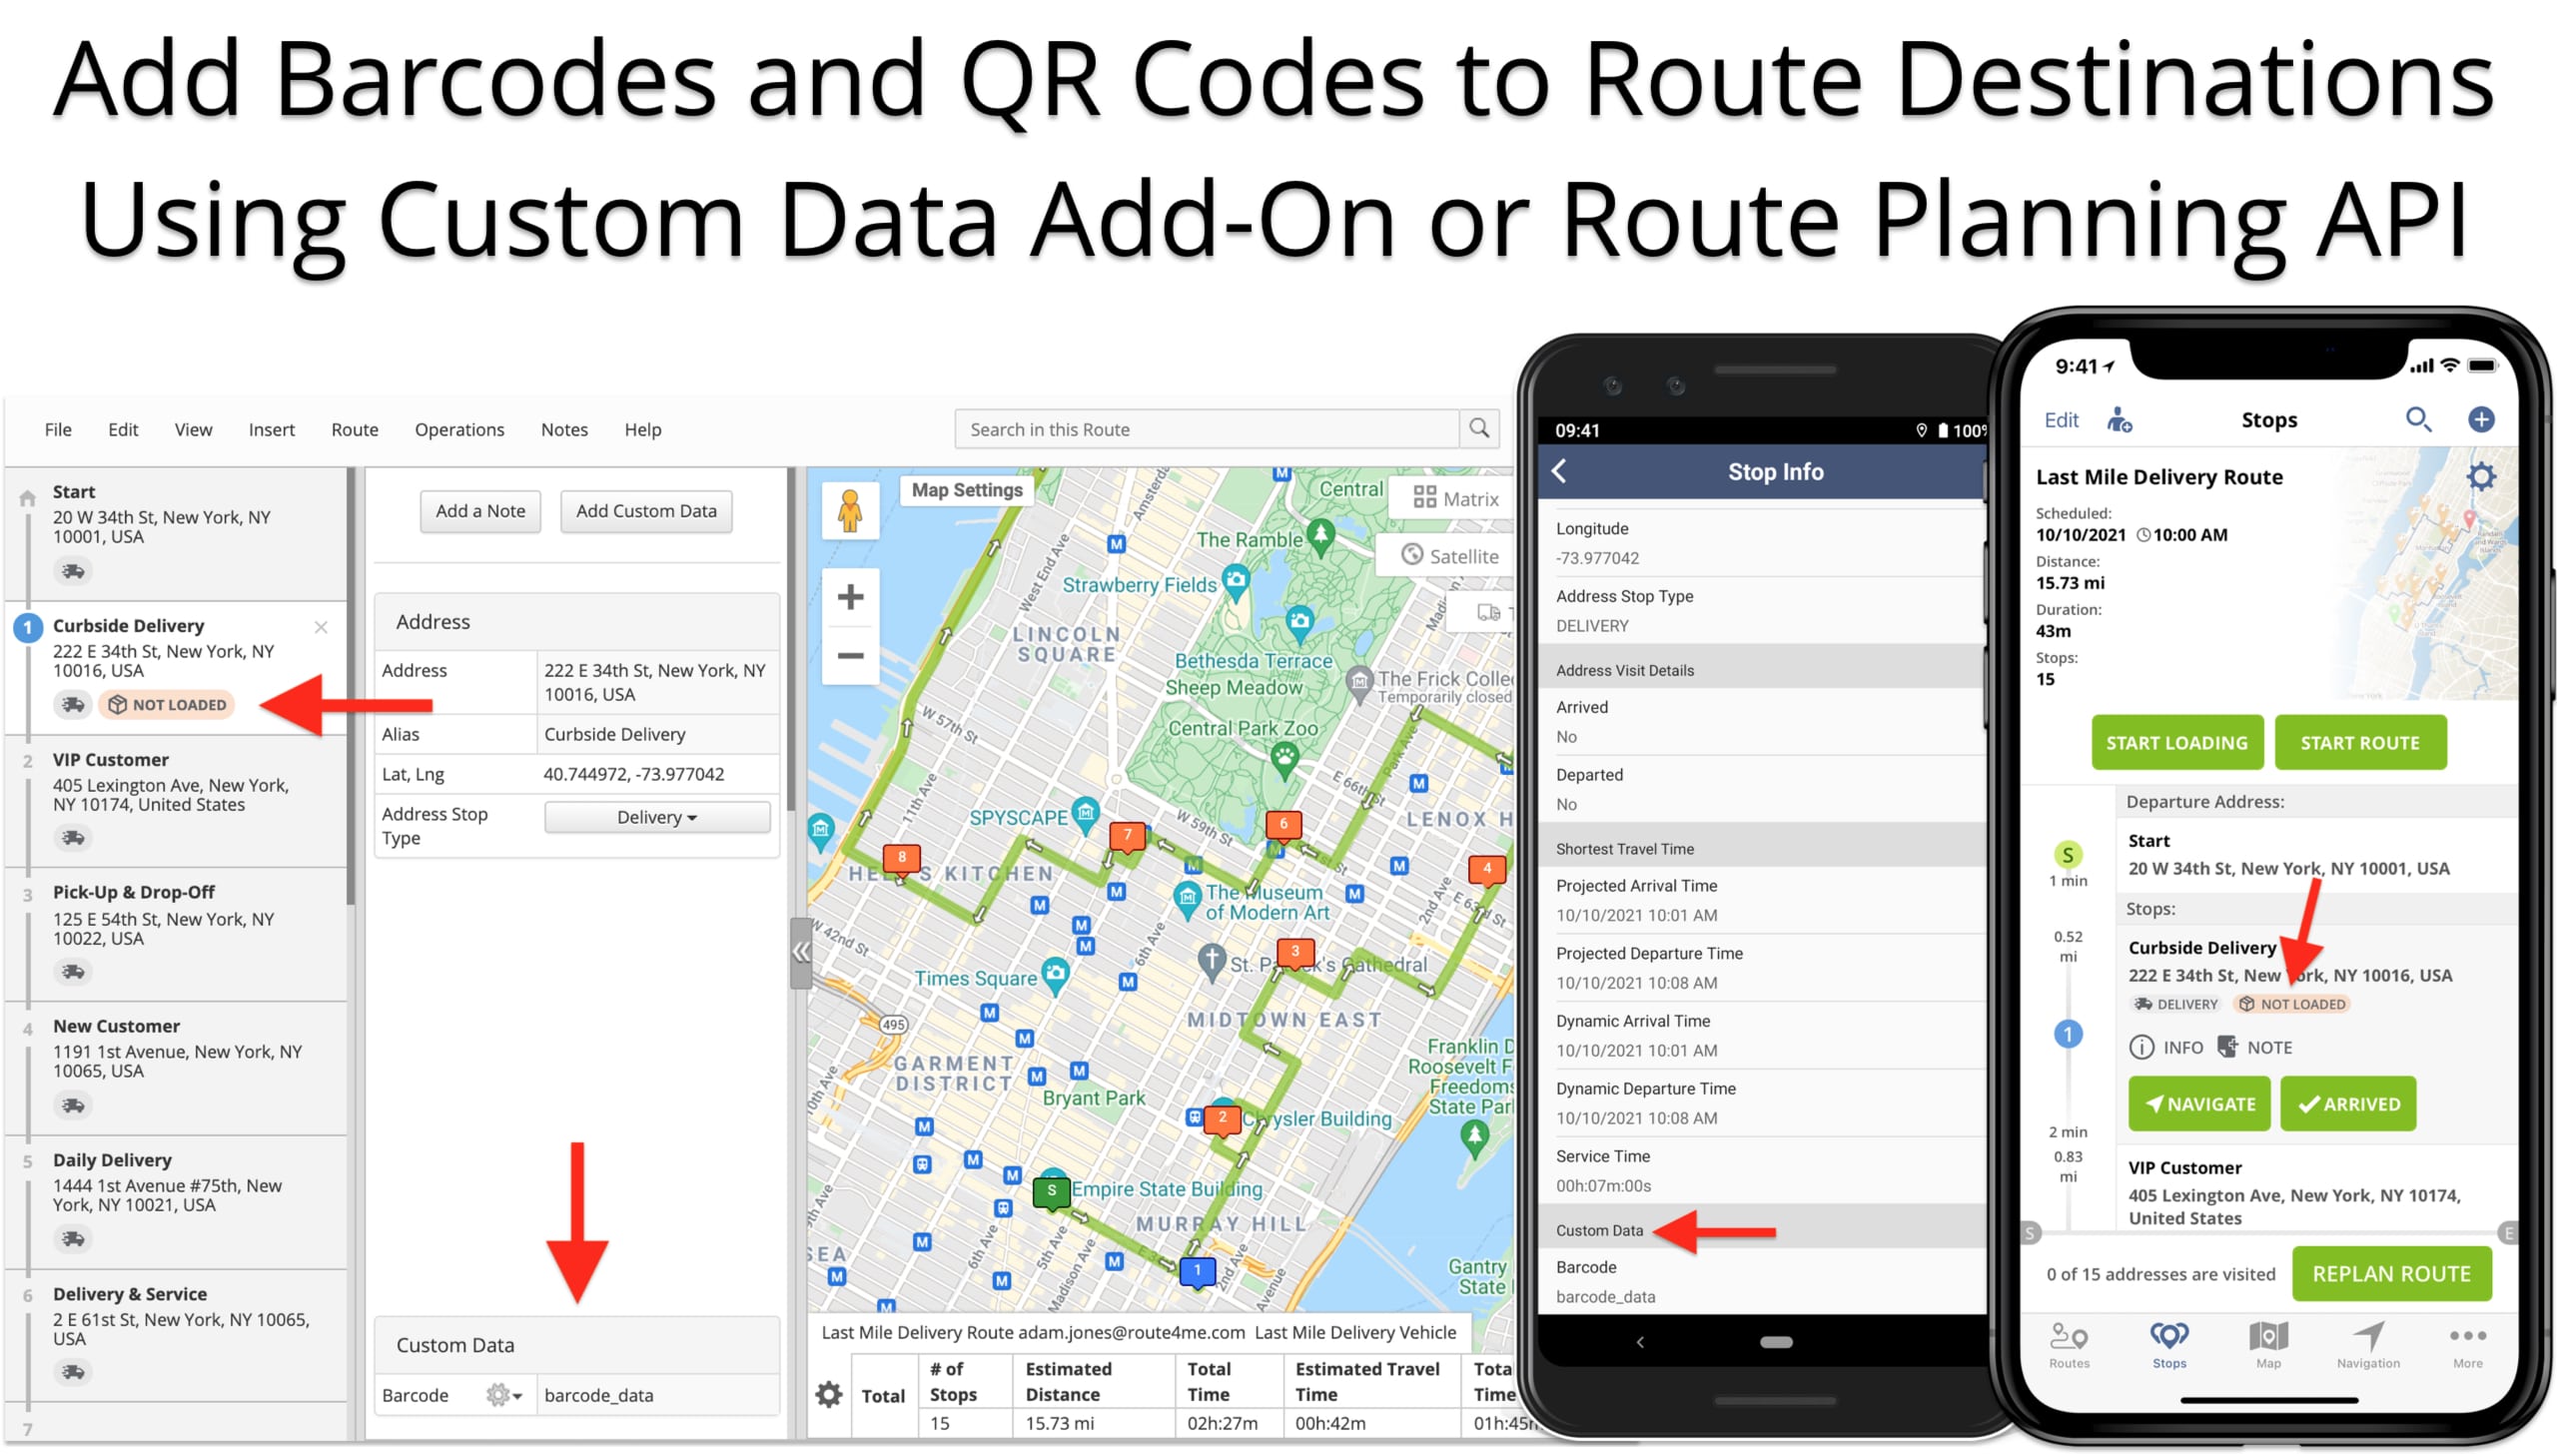 Add barcode data to route destinations for loading and unloading confirmation on route planner.